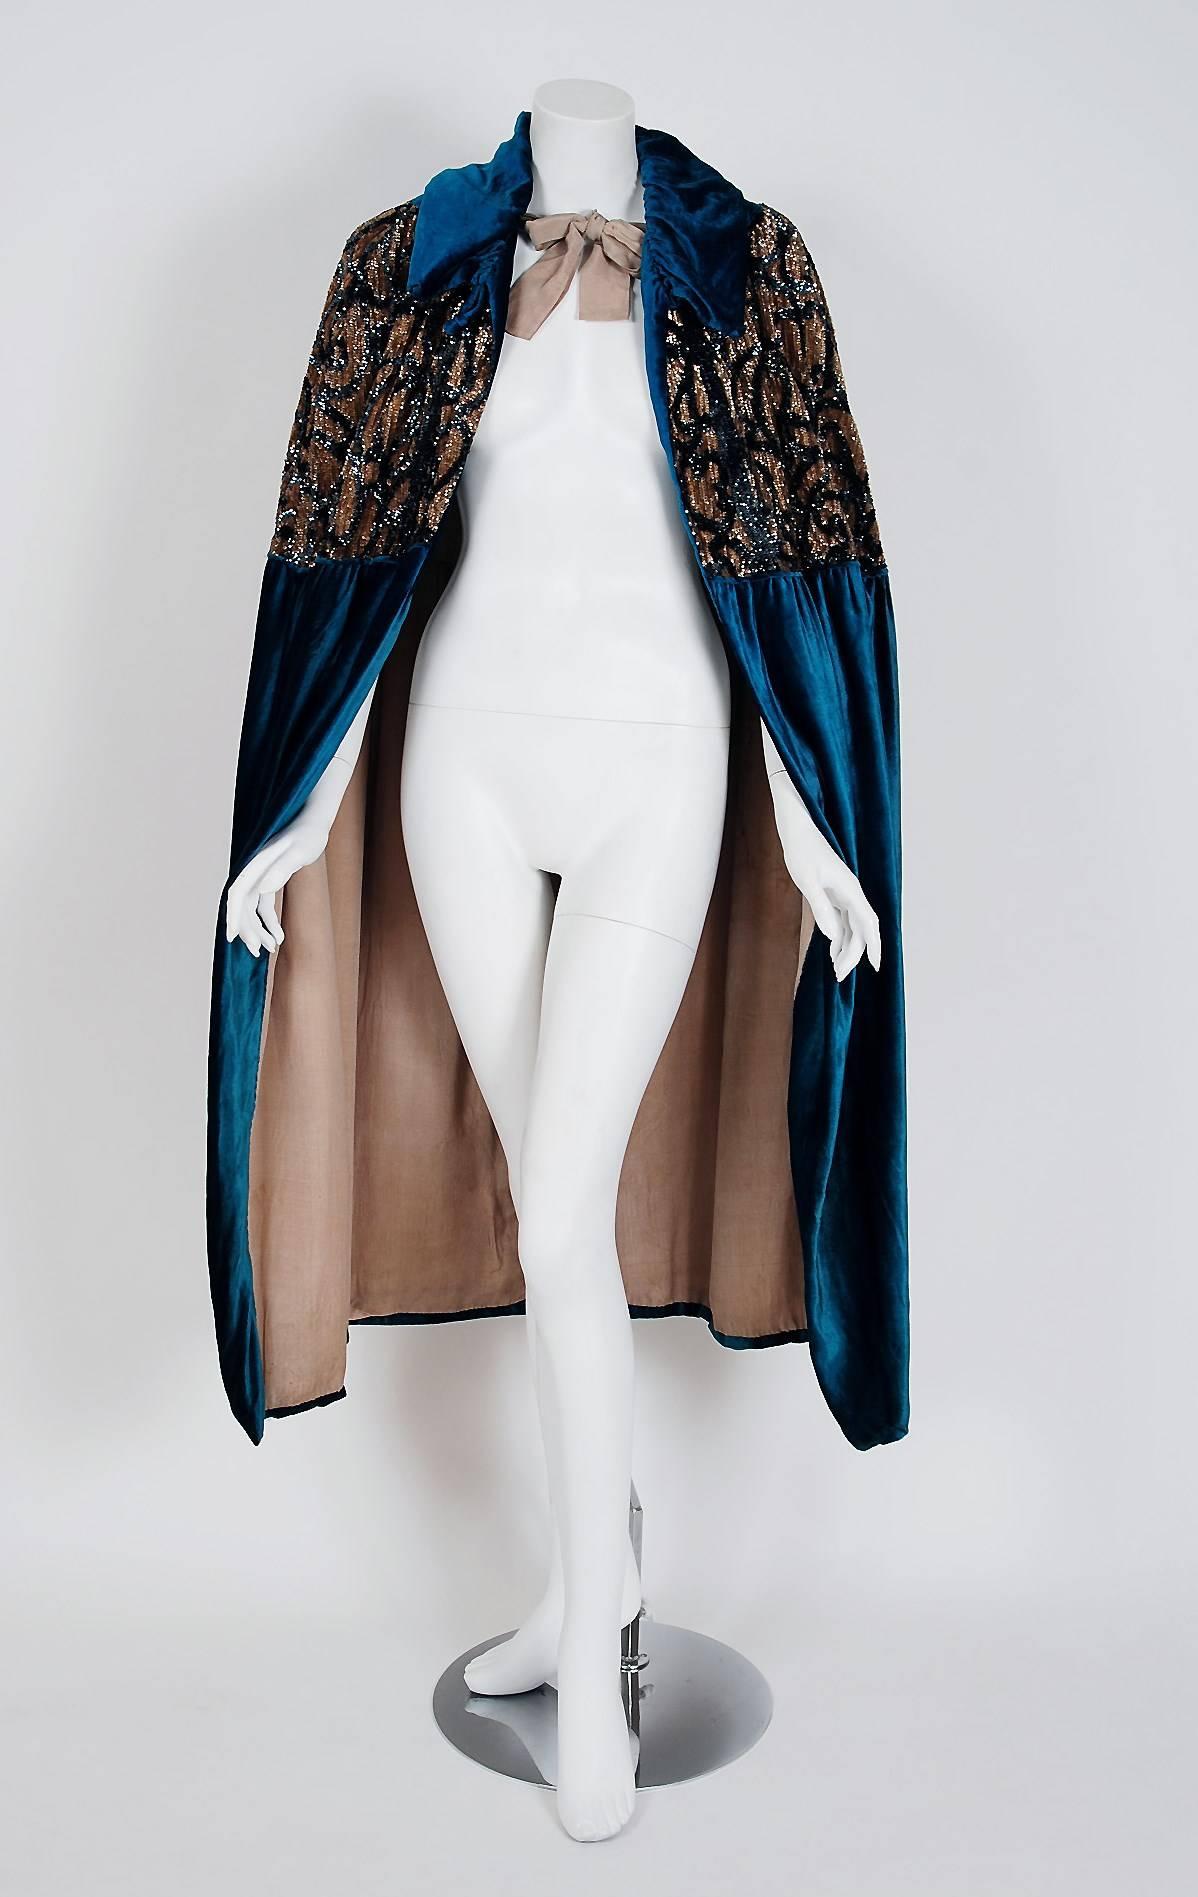 This is a 1920's couture masterpiece from J.L. Hudson which was a very popular high-end Detroit department store. Evening capes from the Art-Deco era remain a perennial favorite, perhaps because no other period combined such opulence with youthful